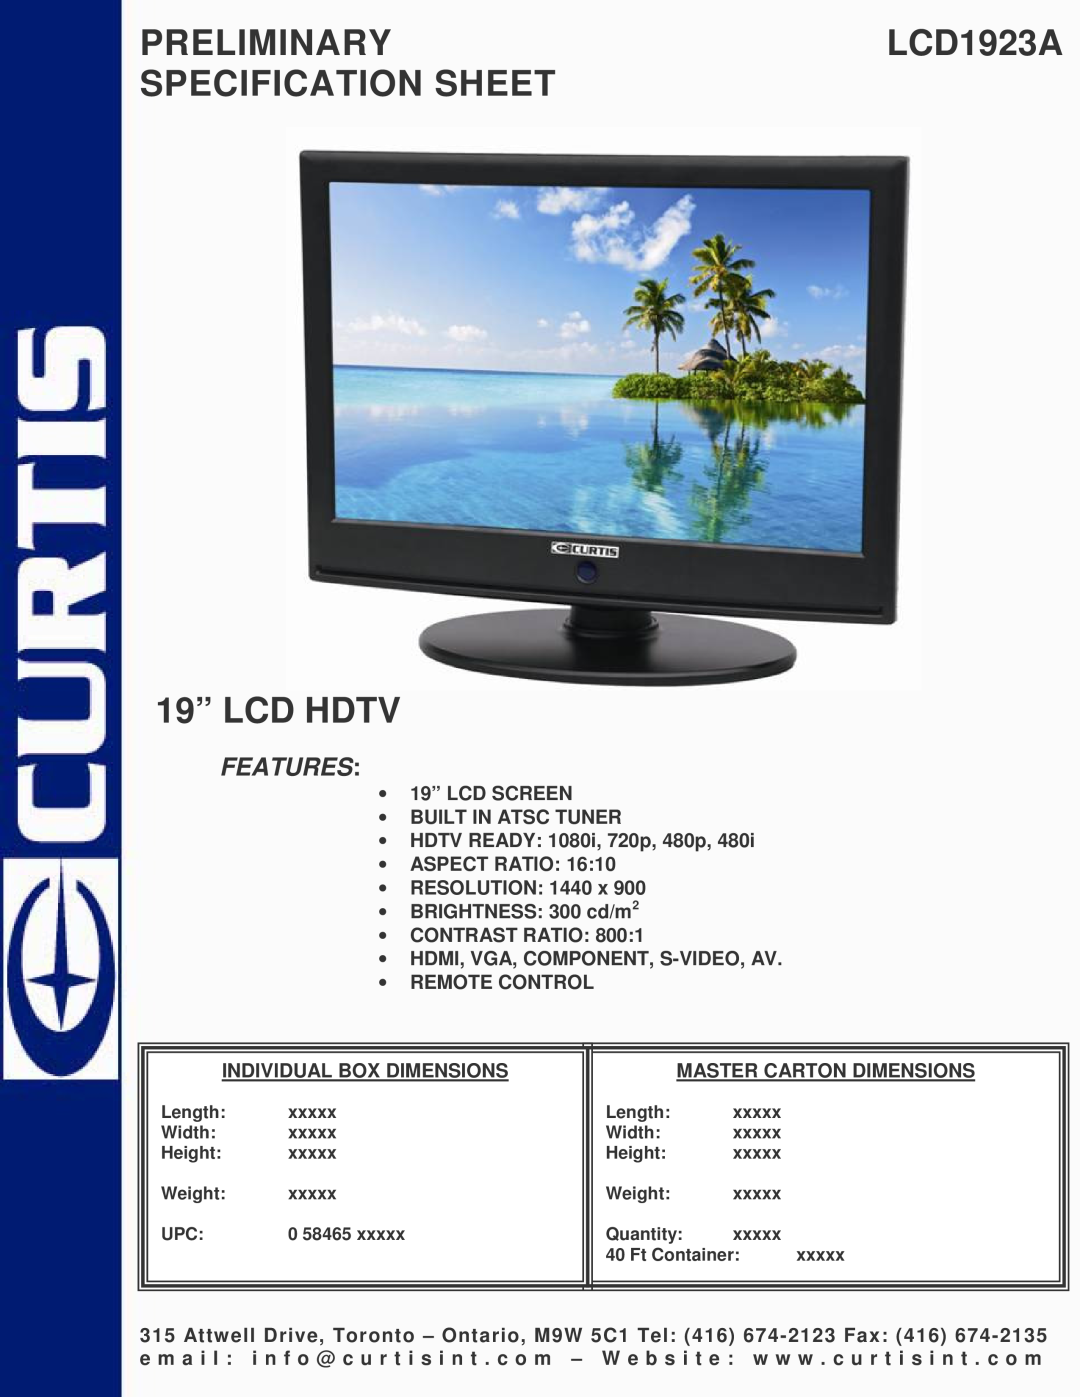 Curtis specifications PRELIMINARYLCD1923A SPECIFICATION SHEET 19” LCD HDTV, Features 